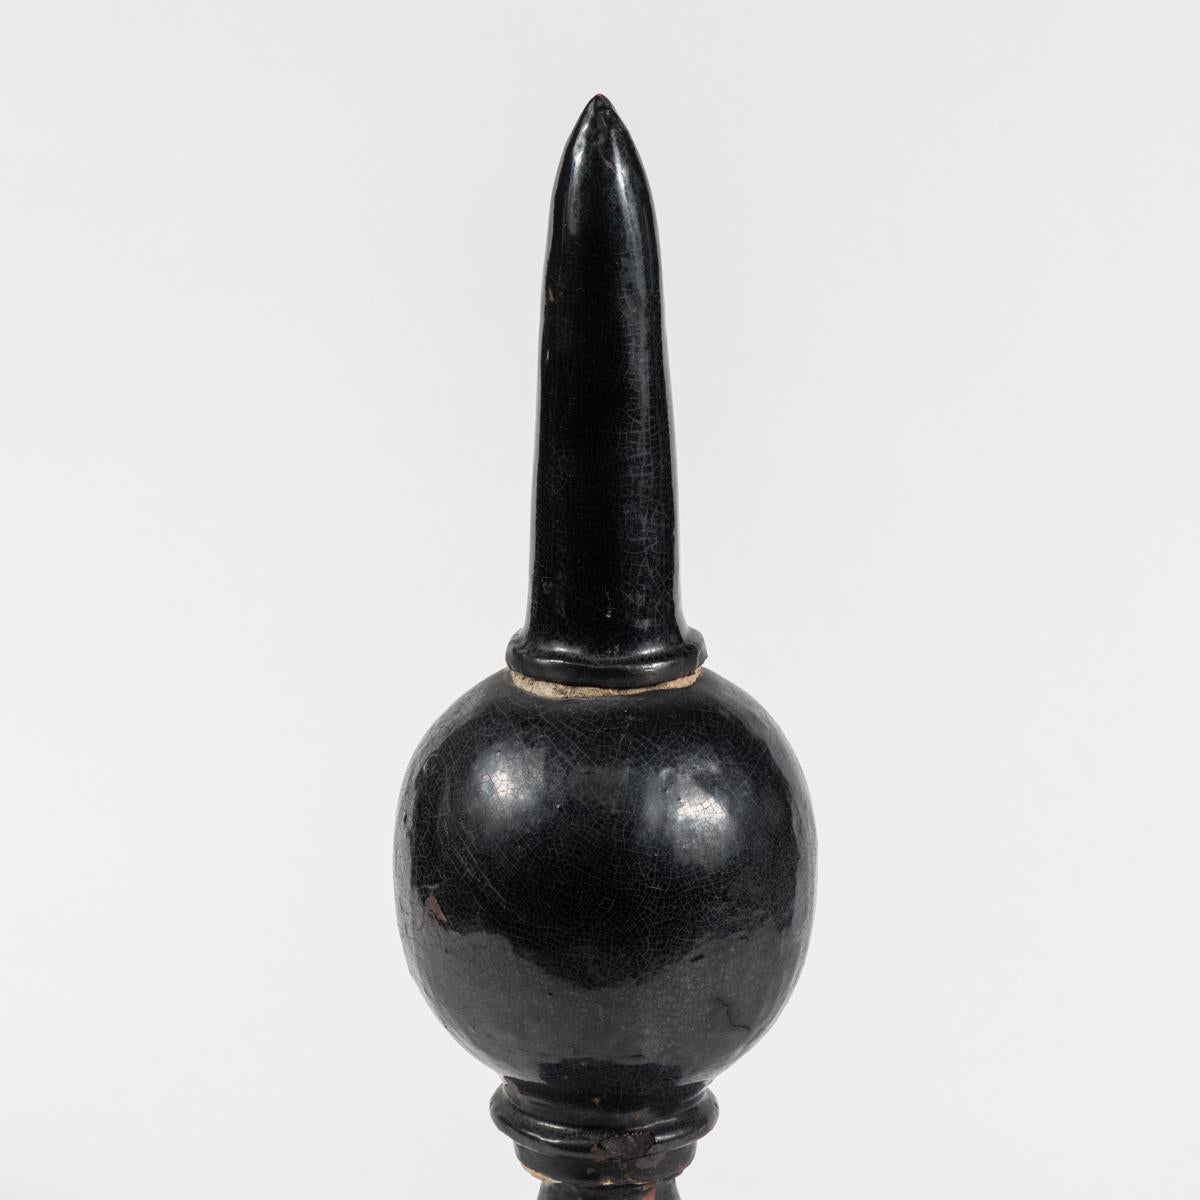 This is a 19th century terracotta finial from England. There is a black glaze applied over the surface of the object, giving it a uniquely aged appearance. 